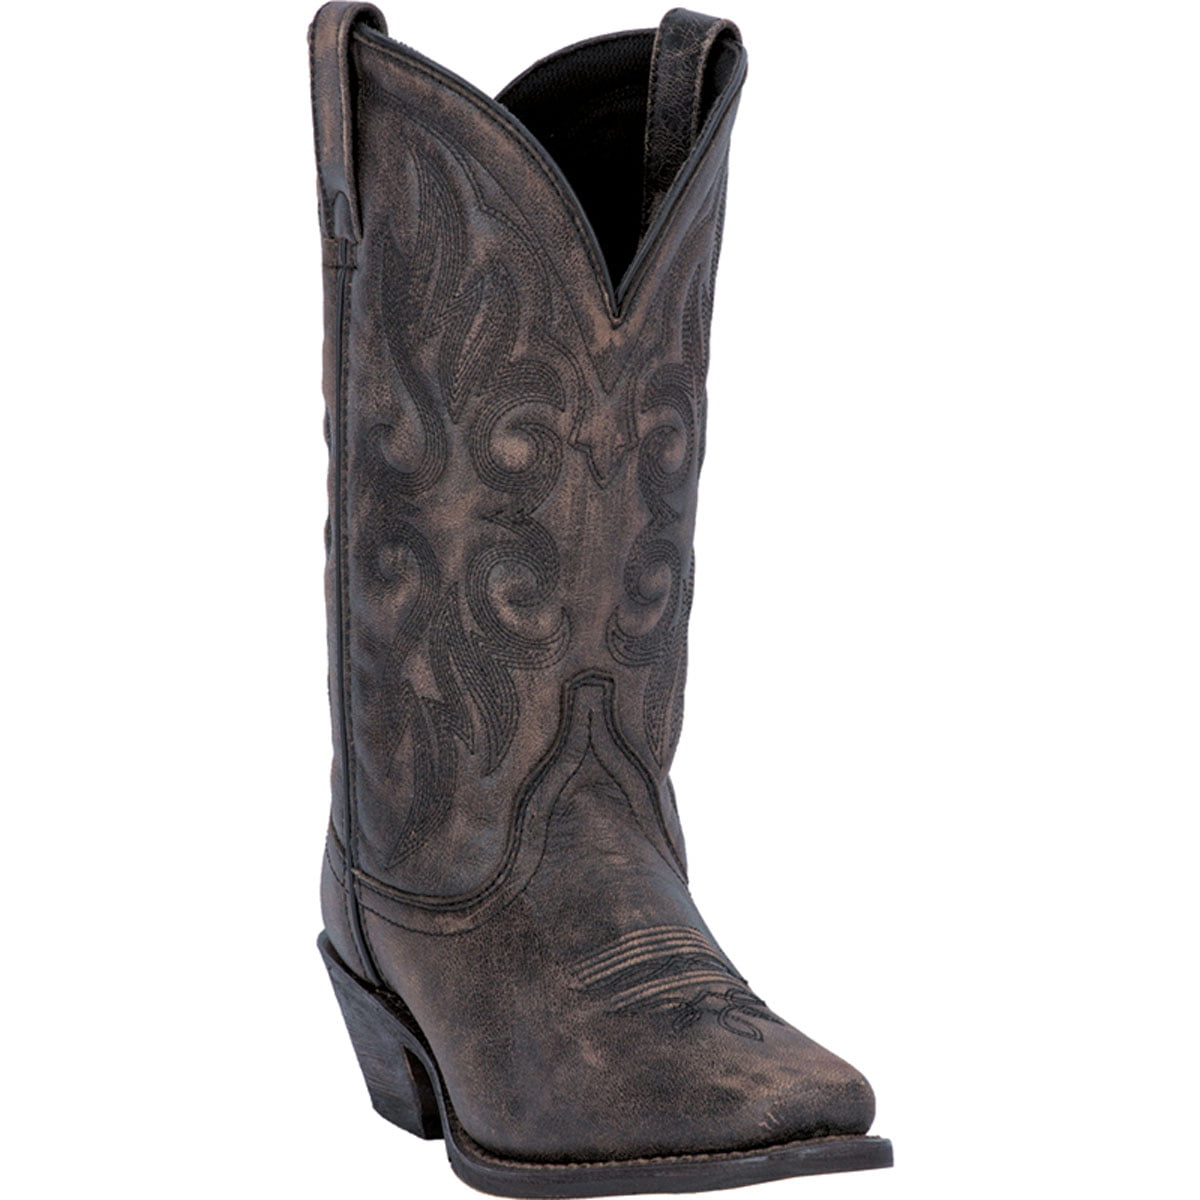 Women Maricopa Tan Crackle Finish Goat Cowgirl Square Toe Boot Details about   Laredo 51041